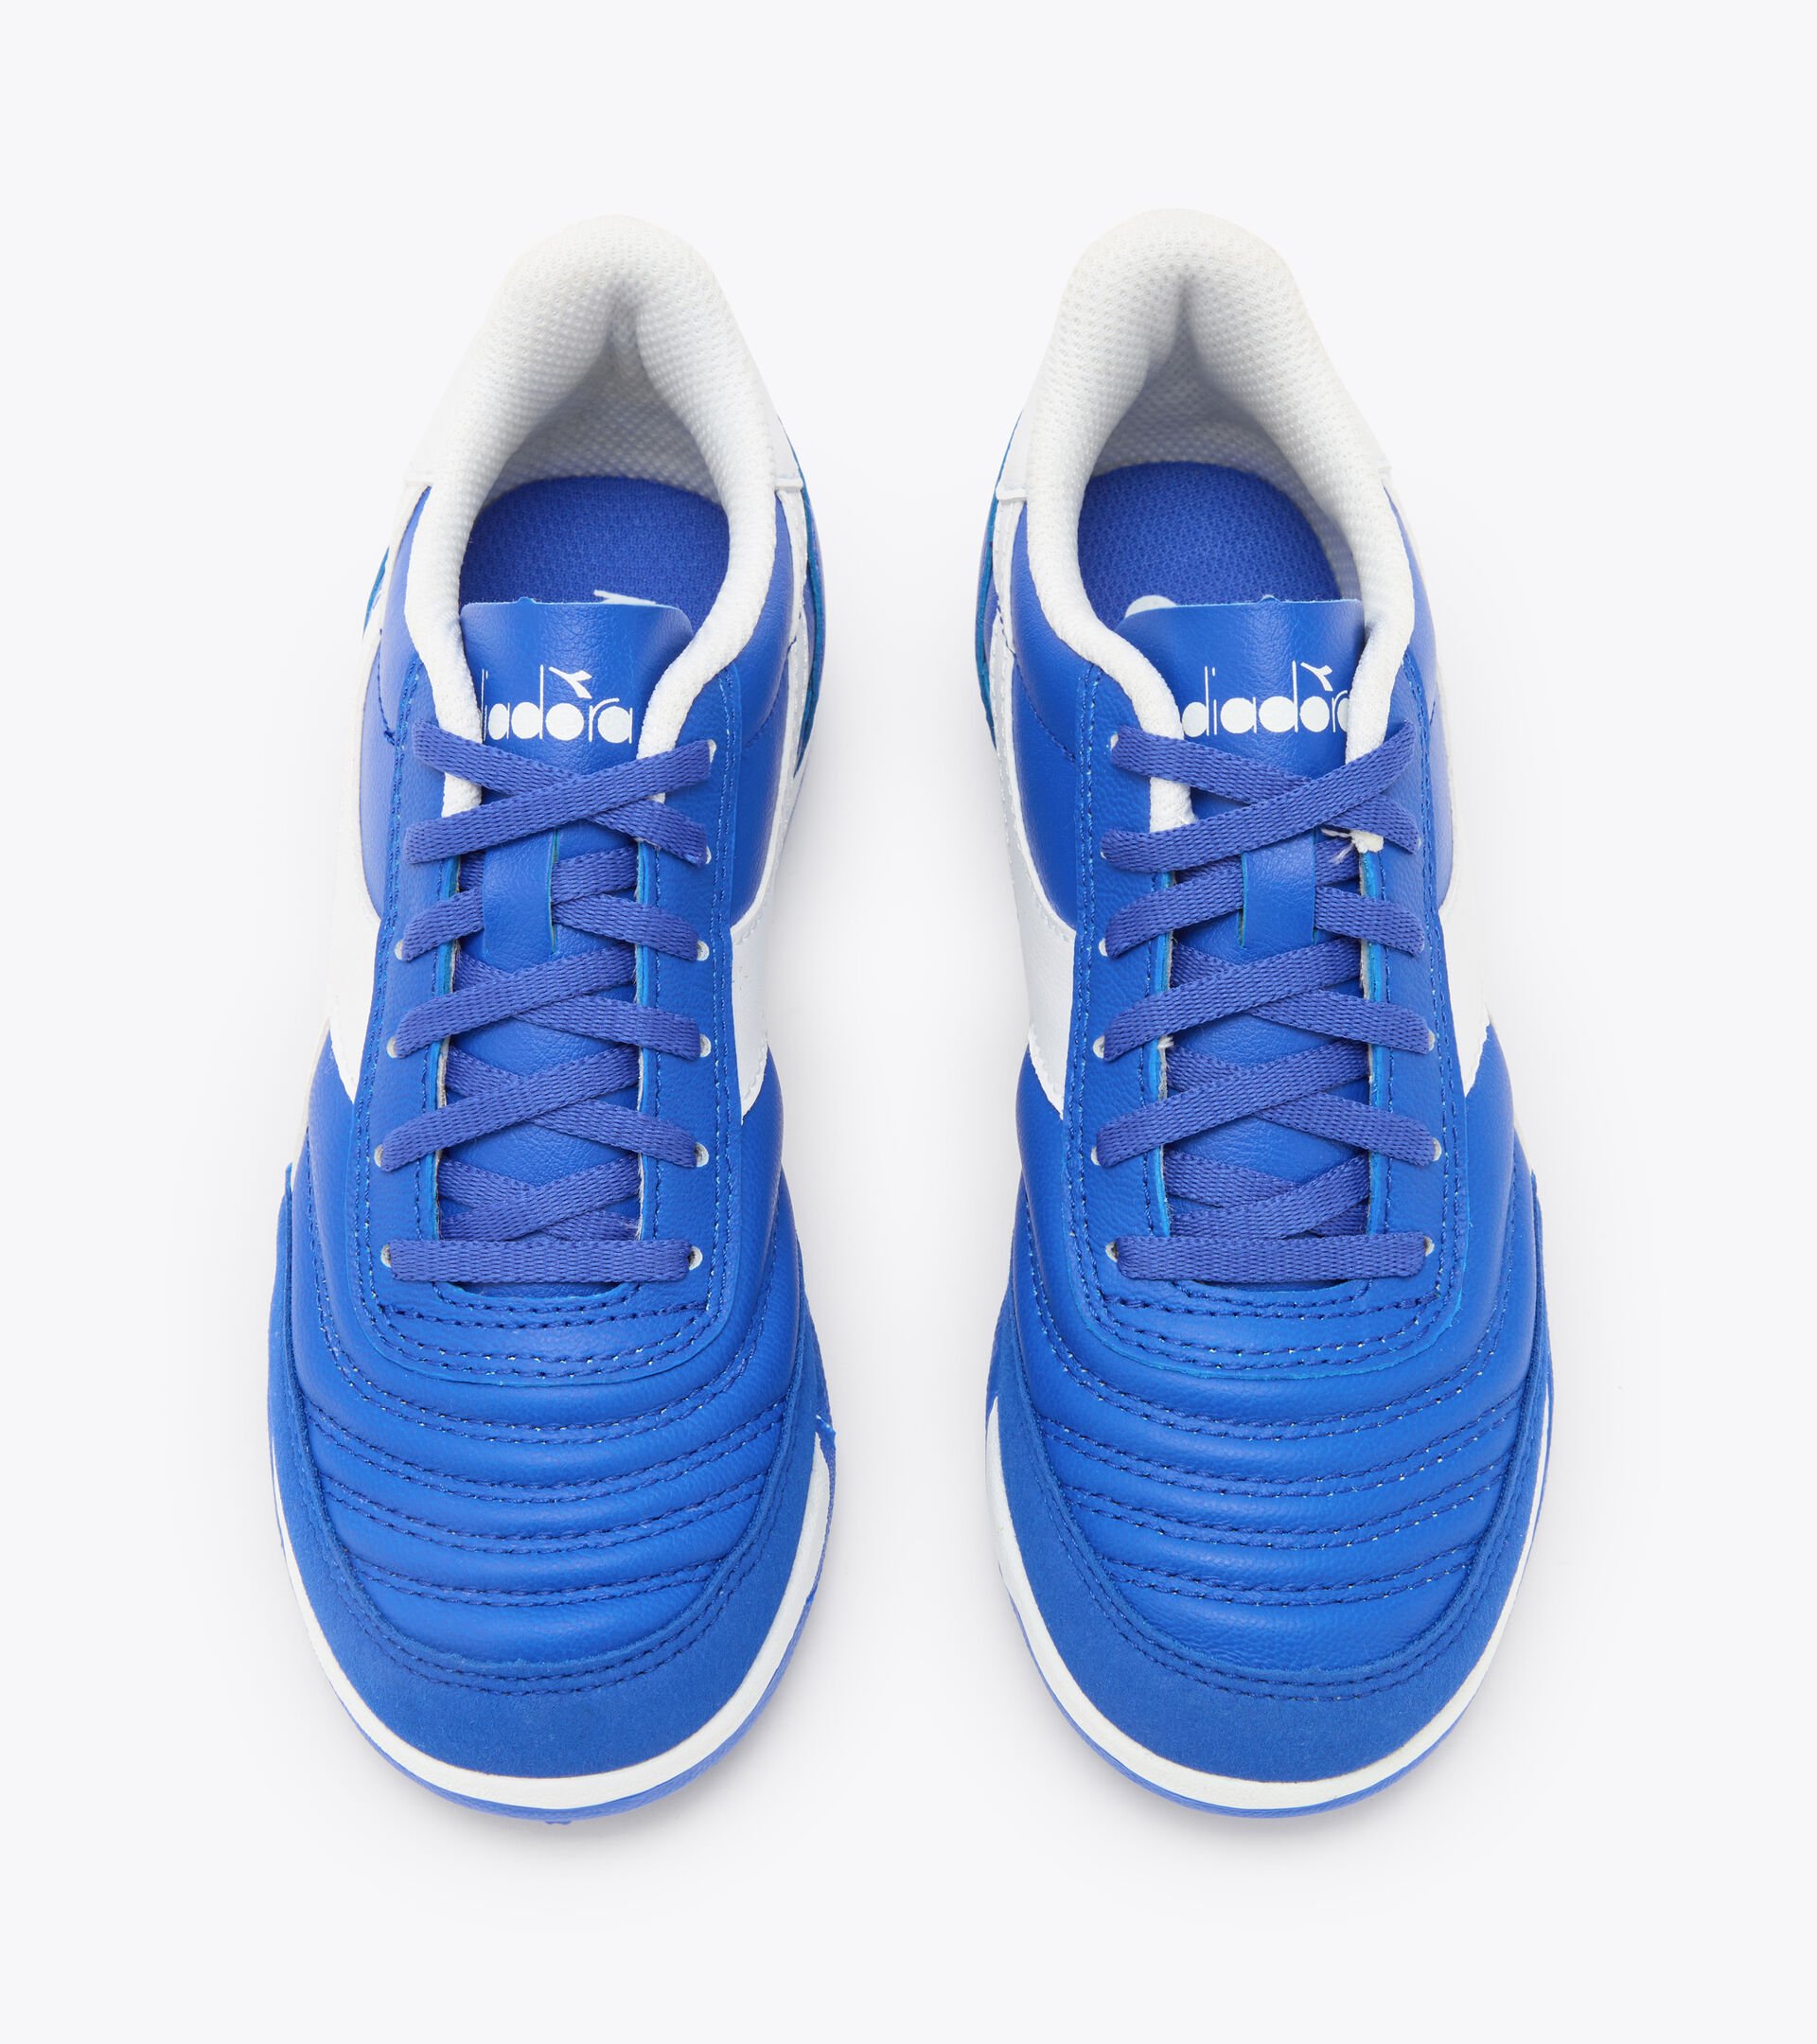 Futsal boot - Specific outsole for synthetic/hard grounds CALCETTO II LT TF Y ROYAL BLUE/OPTICAL WHITE - Diadora